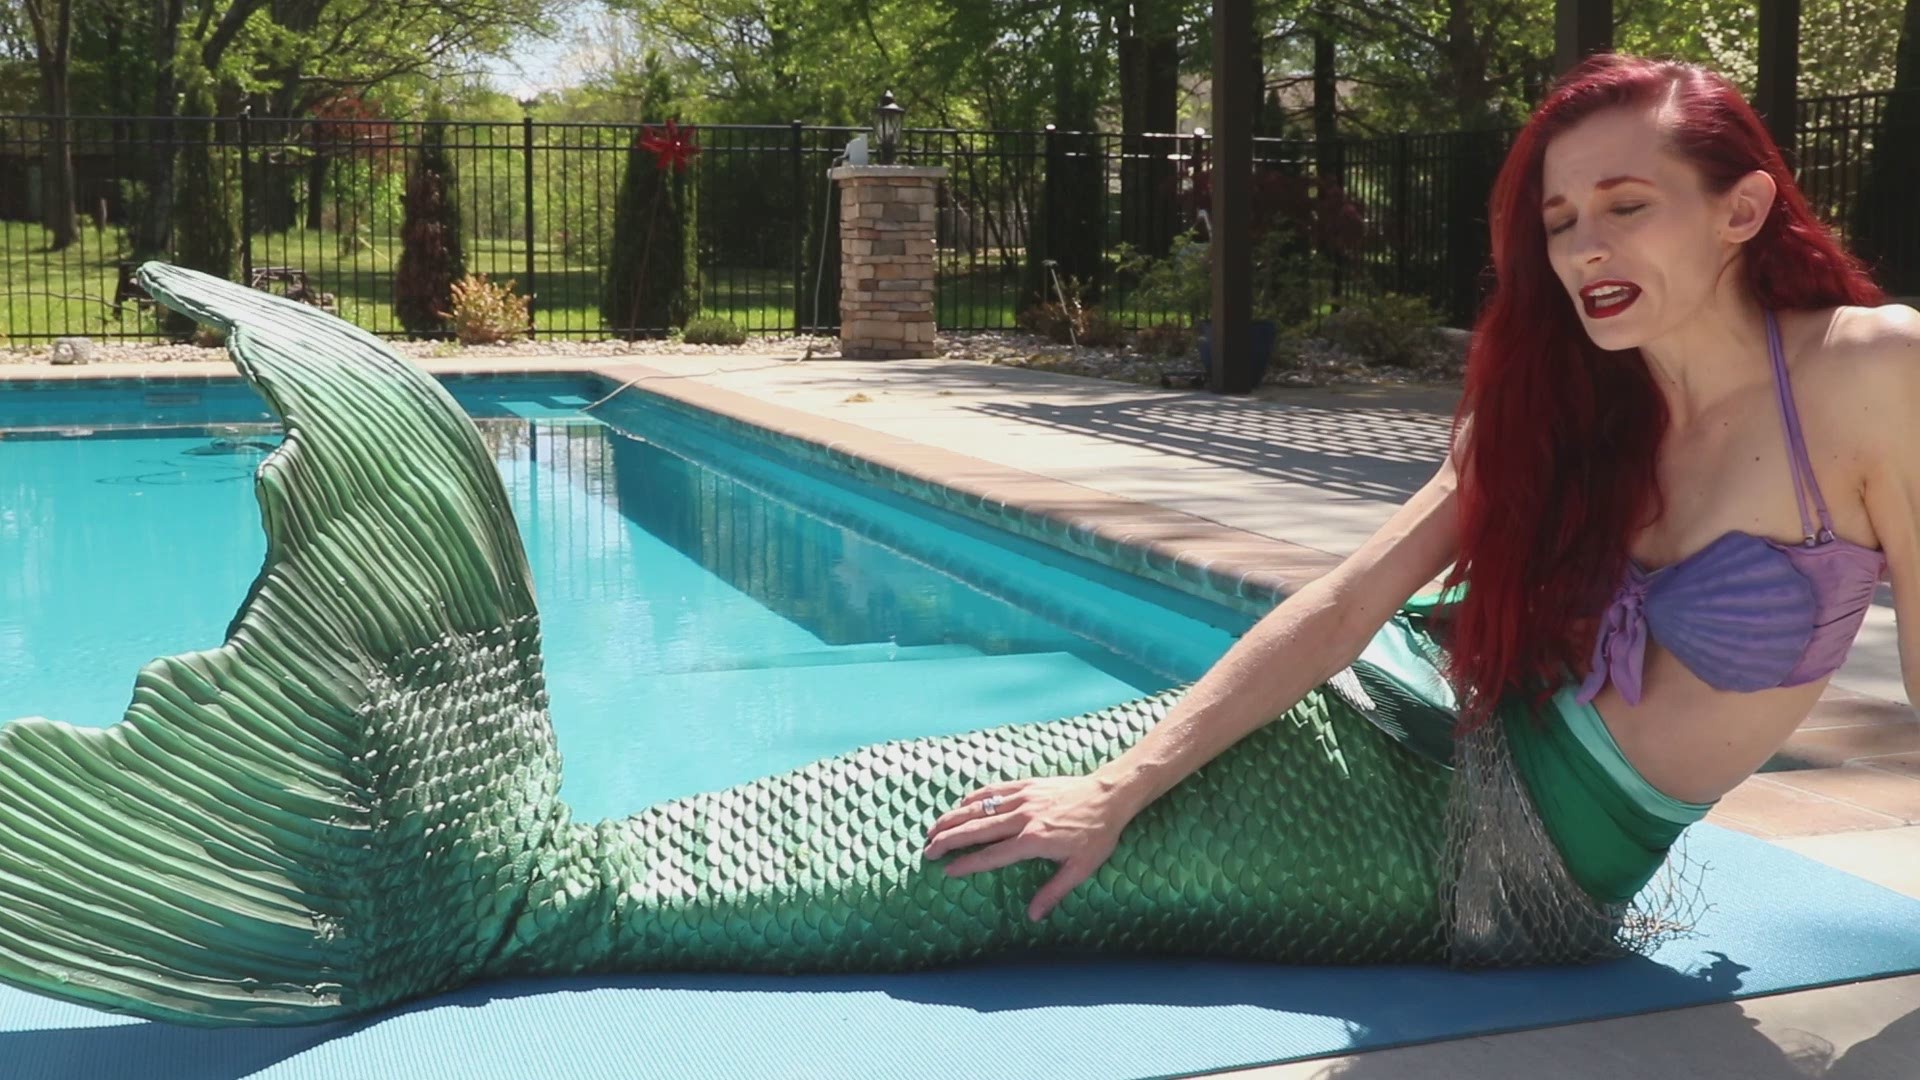 Professional mermaid Sabrina Rose is here to answer your questions about what it's like living life underwater.